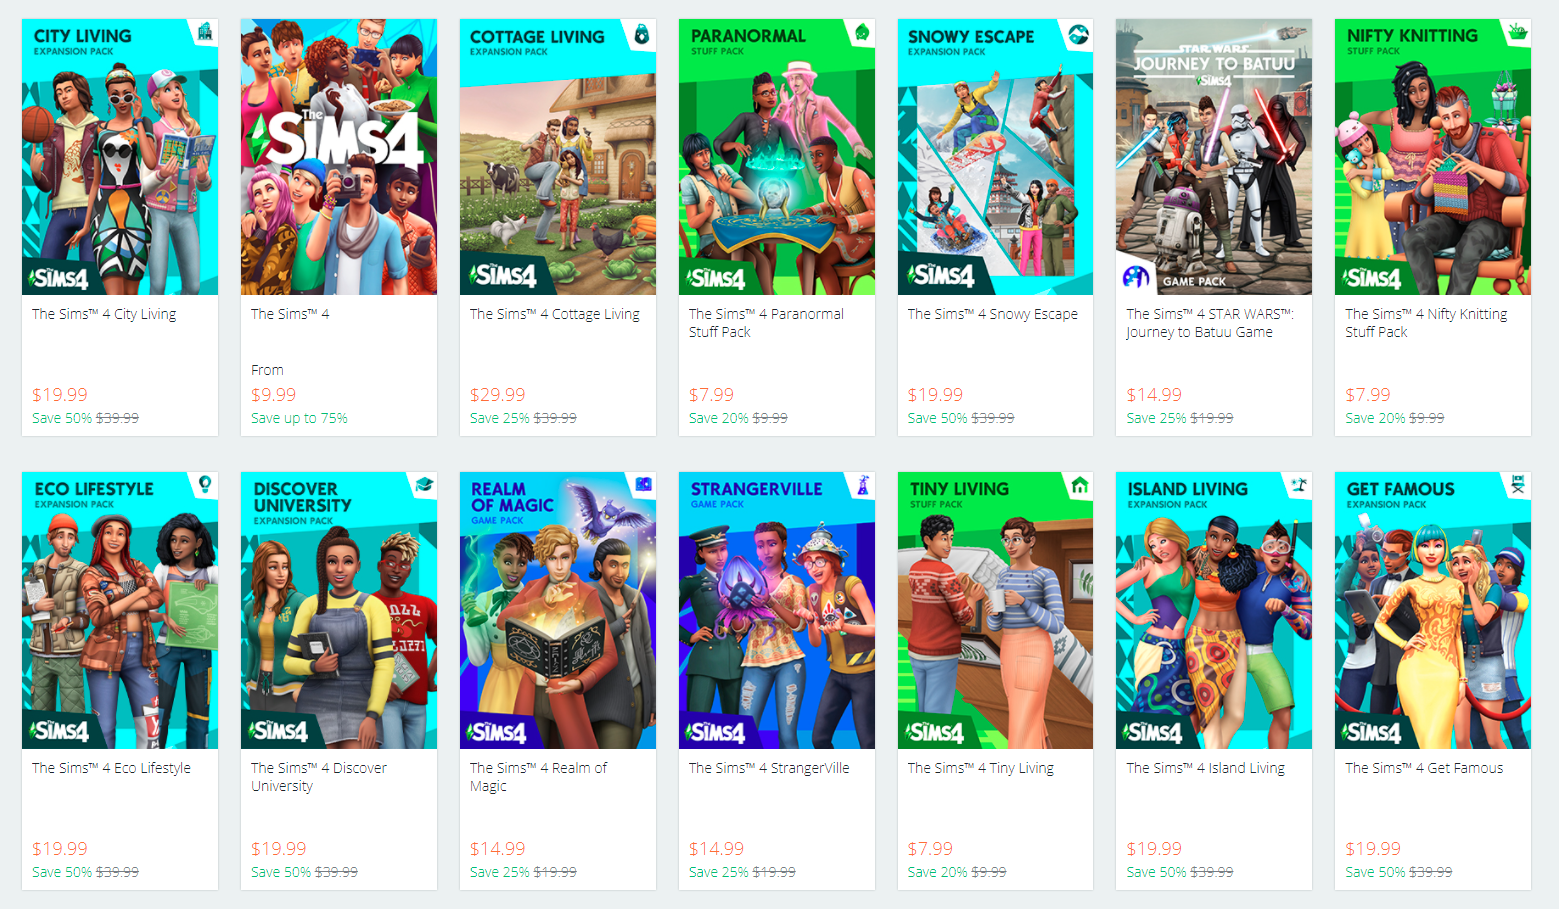 Origin Holiday Sale: Save BIG on The Sims 4 and The Sims 3 Games